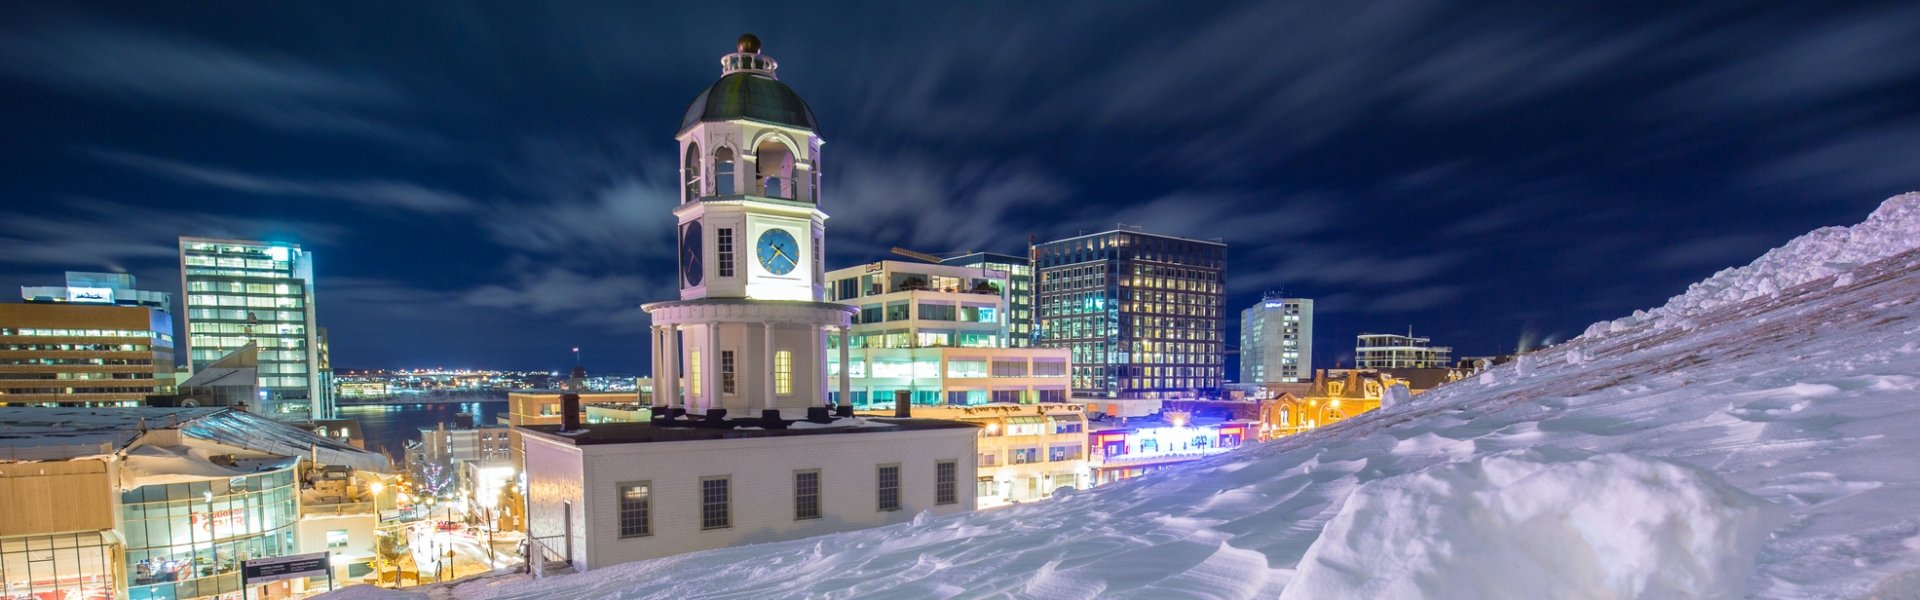 places to visit in halifax in winter